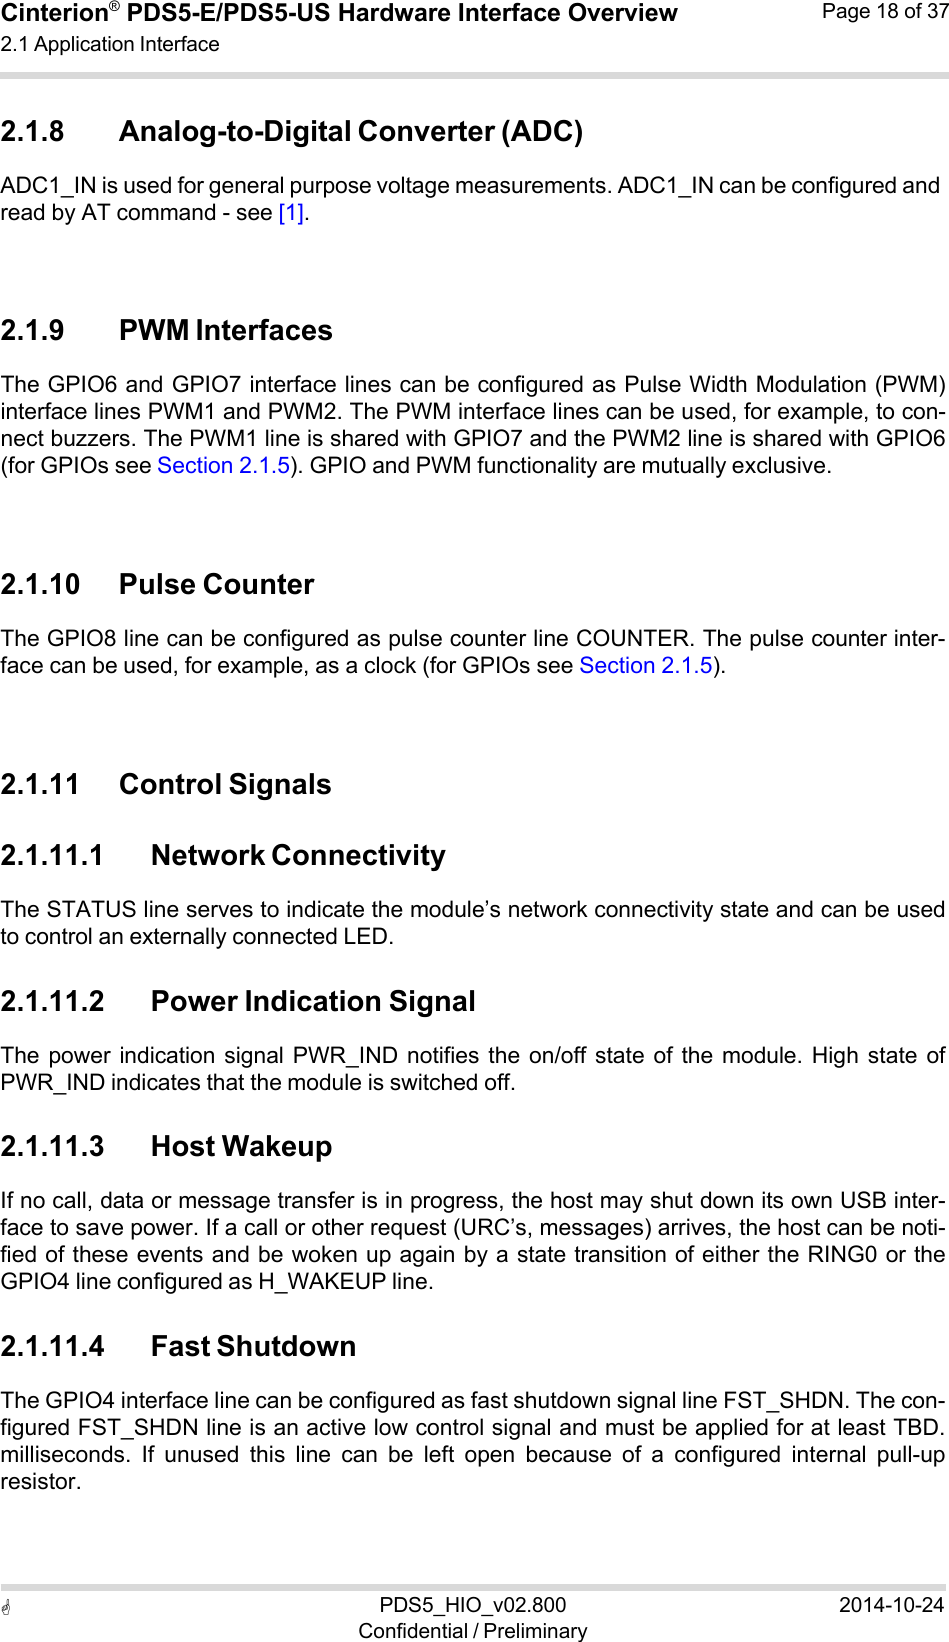  PDS5_HIO_v02.800Confidential / Preliminary2014-10-24Cinterion®  PDS5-E/PDS5-US Hardware Interface Overview2.1 Application Interface Page 18 of 37   2.1.8 Analog-to-Digital Converter (ADC) ADC1_IN is used for general purpose voltage measurements. ADC1_IN can be configured and read by AT command - see [1].    2.1.9 PWM Interfaces The GPIO6 and GPIO7 interface lines can be configured as Pulse Width Modulation (PWM) interface lines PWM1 and PWM2. The PWM interface lines can be used, for example, to con- nect buzzers. The PWM1 line is shared with GPIO7 and the PWM2 line is shared with GPIO6 (for GPIOs see Section 2.1.5). GPIO and PWM functionality are mutually exclusive.    2.1.10 Pulse Counter The GPIO8 line can be configured as pulse counter line COUNTER. The pulse counter inter- face can be used, for example, as a clock (for GPIOs see Section 2.1.5).    2.1.11 Control Signals  2.1.11.1 Network Connectivity The STATUS line serves to indicate the module’s network connectivity state and can be used to control an externally connected LED.  2.1.11.2 Power Indication Signal The power  indication signal  PWR_IND  notifies the  on/off  state  of  the  module.  High  state of PWR_IND indicates that the module is switched off.  2.1.11.3 Host Wakeup If no call, data or message transfer is in progress, the host may shut down its own USB inter- face to save power. If a call or other request (URC’s, messages) arrives, the host can be noti- fied of these events and be woken up again by a state transition of either the RING0 or the GPIO4 line configured as H_WAKEUP line.  2.1.11.4 Fast Shutdown The GPIO4 interface line can be configured as fast shutdown signal line FST_SHDN. The con- figured FST_SHDN line is an active low control signal and must be applied for at least TBD. milliseconds.  If  unused  this  line  can  be  left  open  because  of  a  configured  internal  pull-up resistor. 